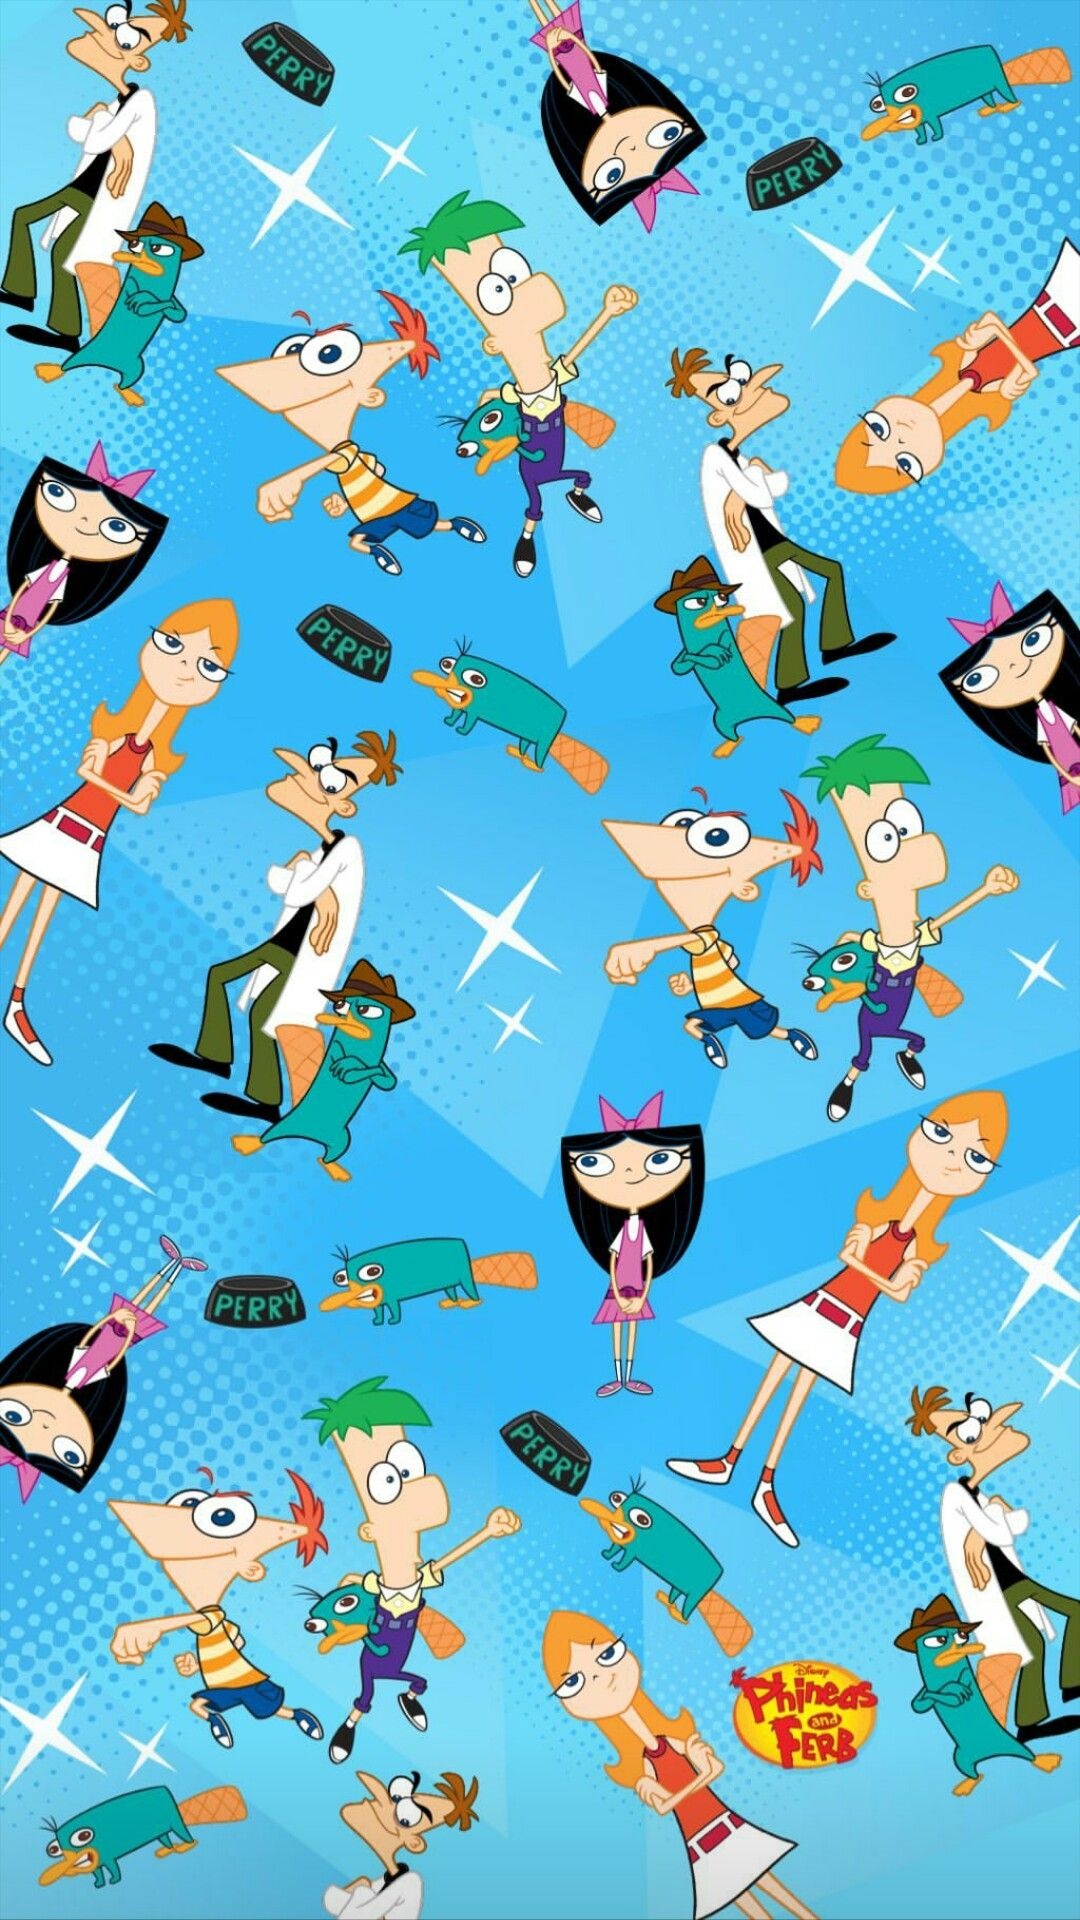 Disney wallpapers, Phineas and Ferb, Cartoon wallpaper, iPhone, 1080x1920 Full HD Handy